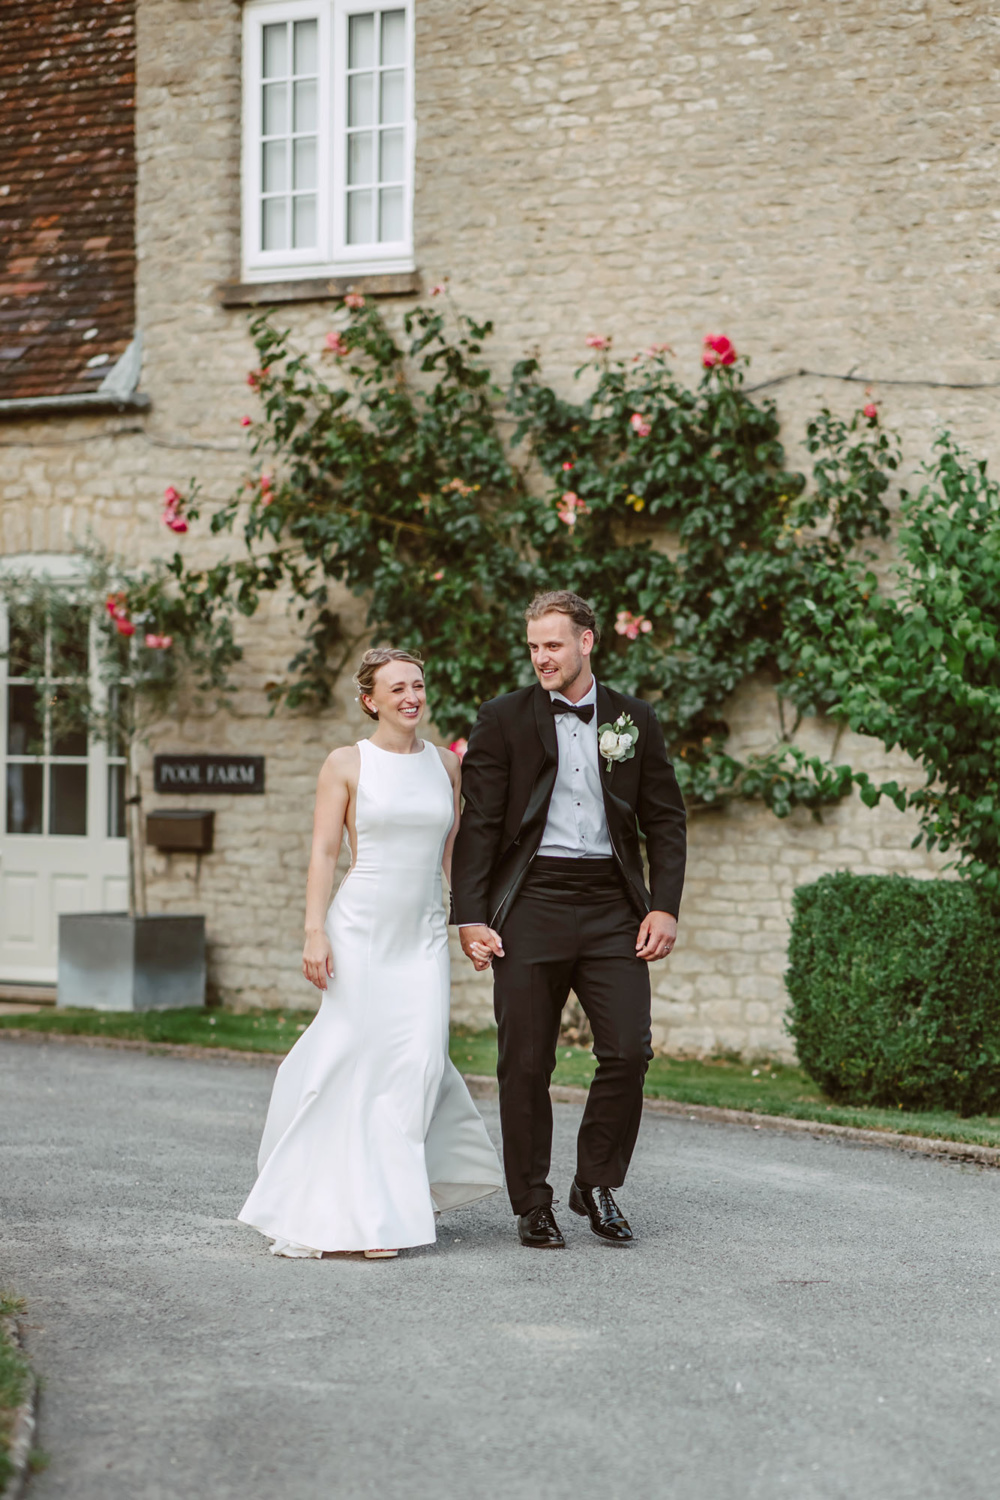 The bride and the groom walking hand in hand smiling et the Stratton court Barn